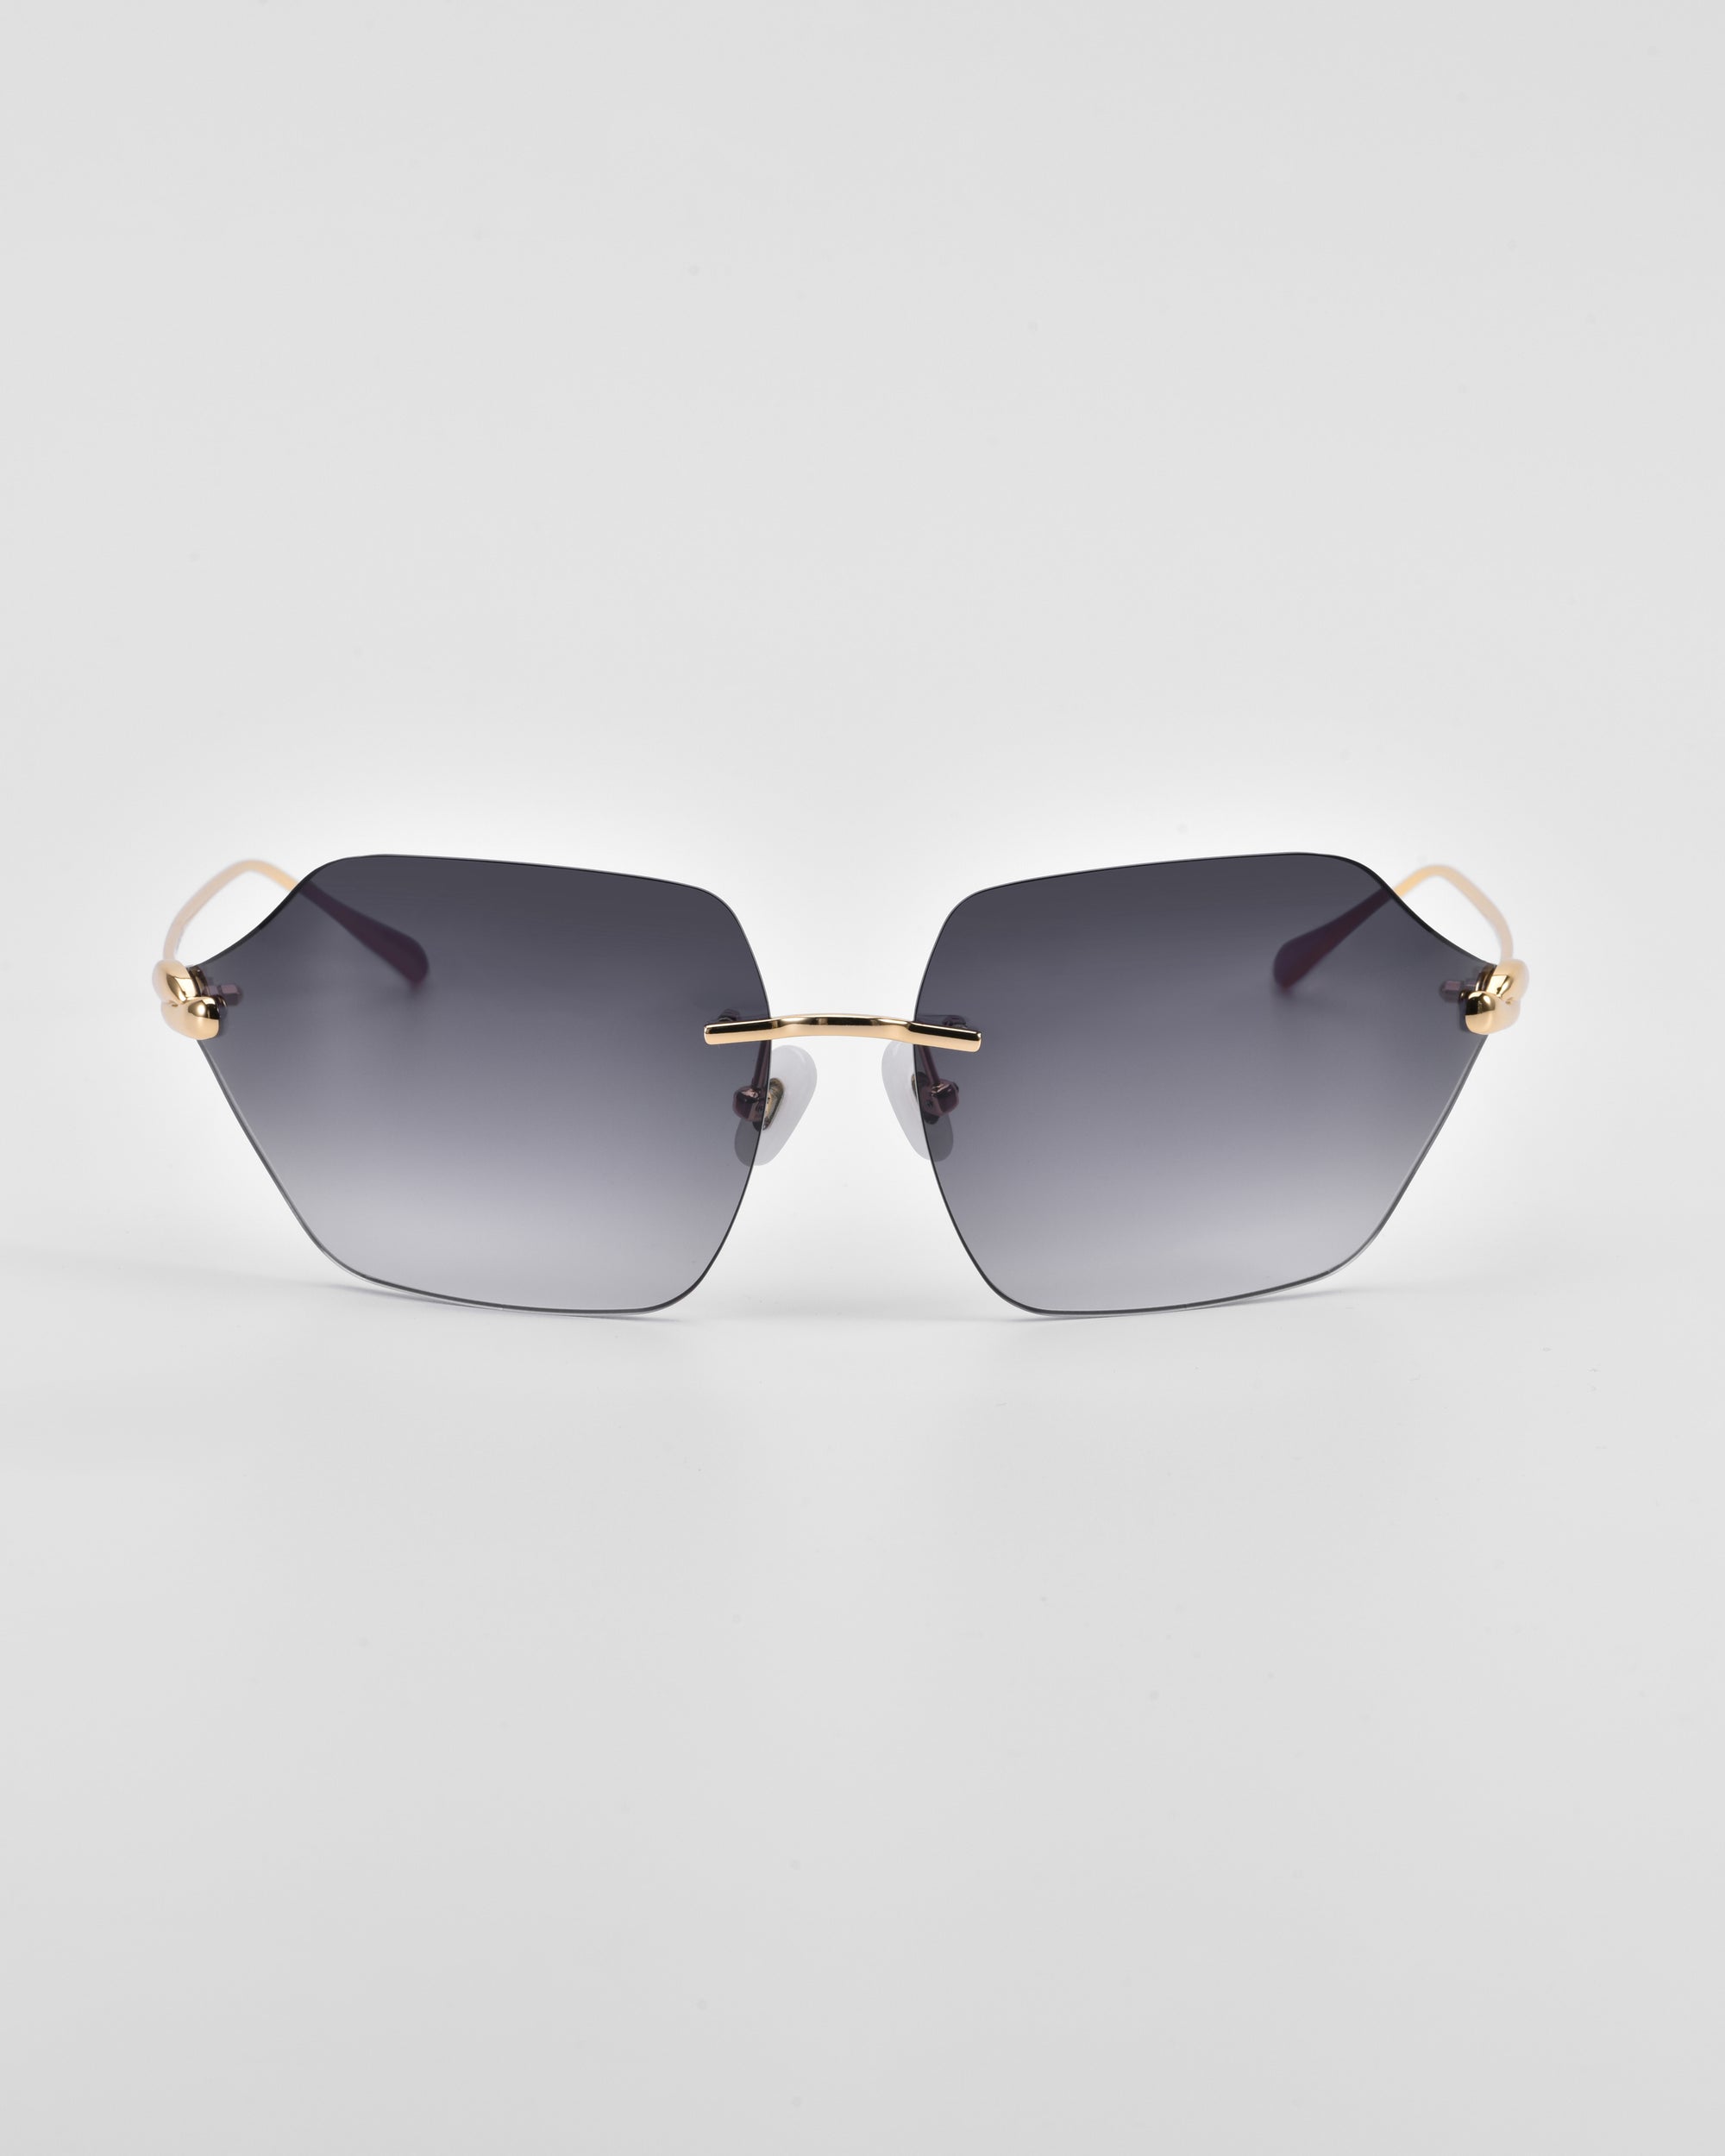 A pair of stylish For Art&#39;s Sake® Serpent II sunglasses featuring oversized, geometric hexagonal lenses with dark gray gradient tint and 18-karat gold-plated metal accents on the hinges and nose bridge, set against a plain white background.